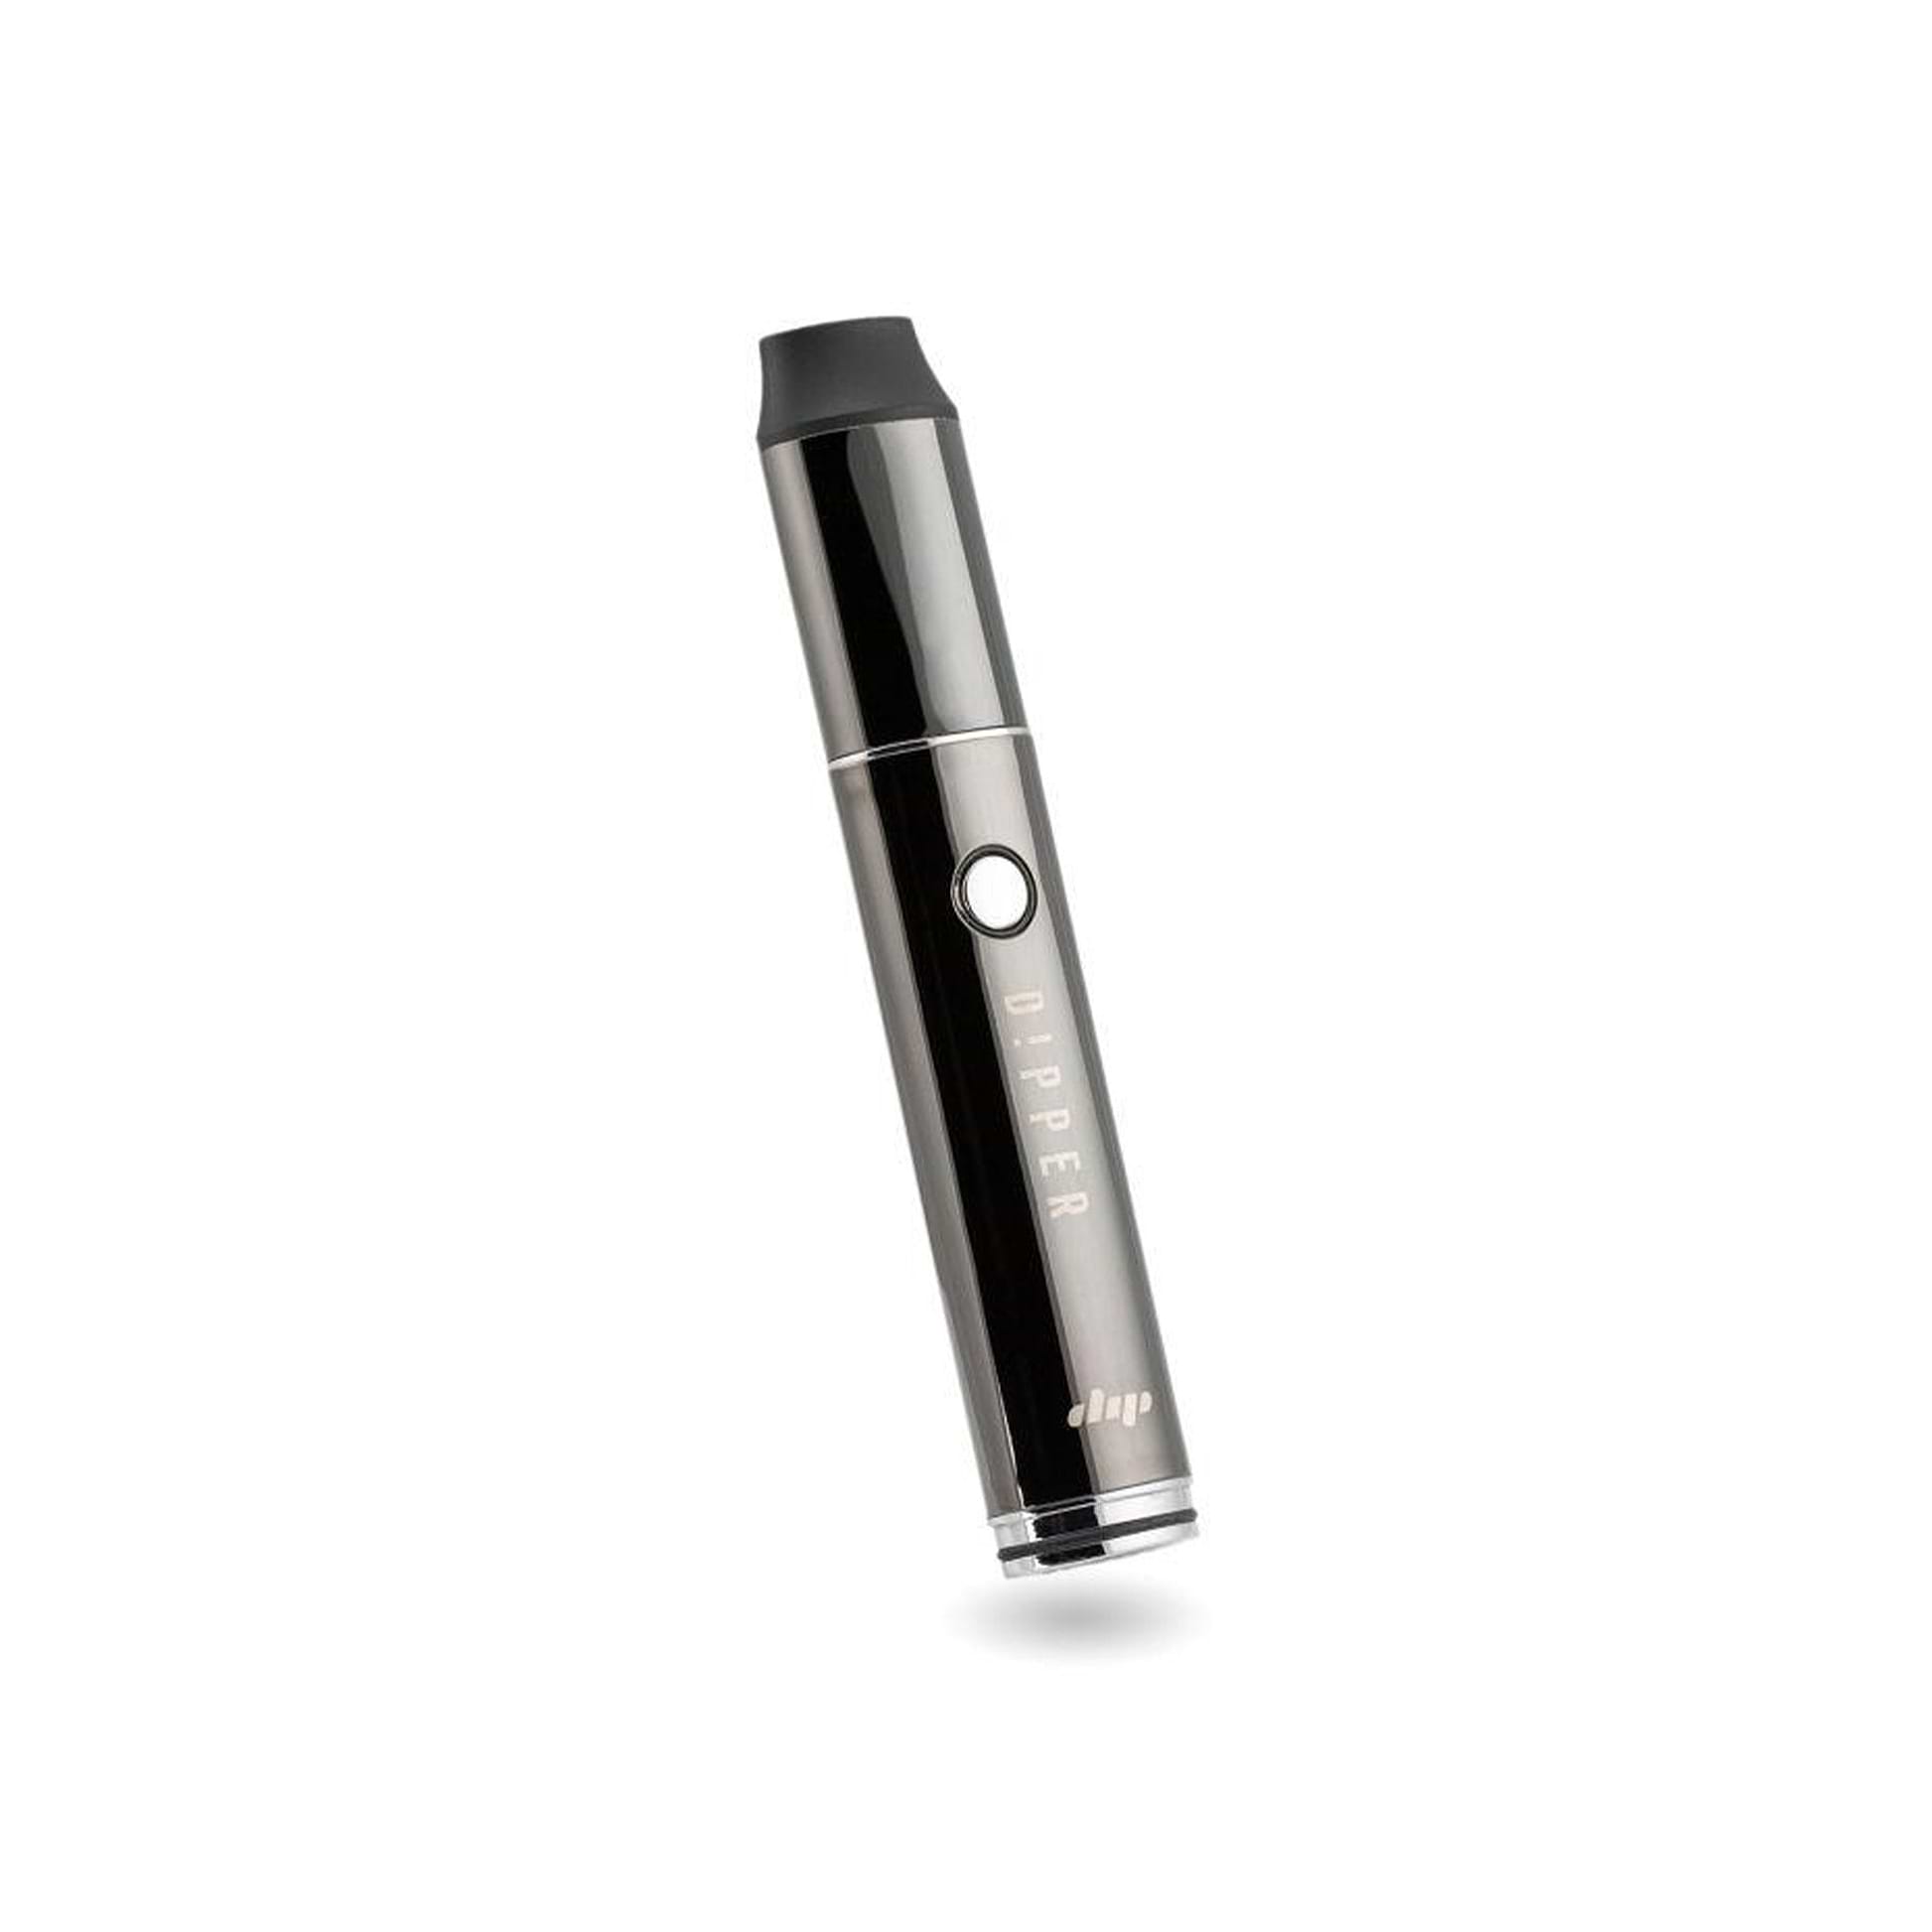 Dip Dipper 2-in-1 Dab Pen and Dab Straw Vape Charcoal